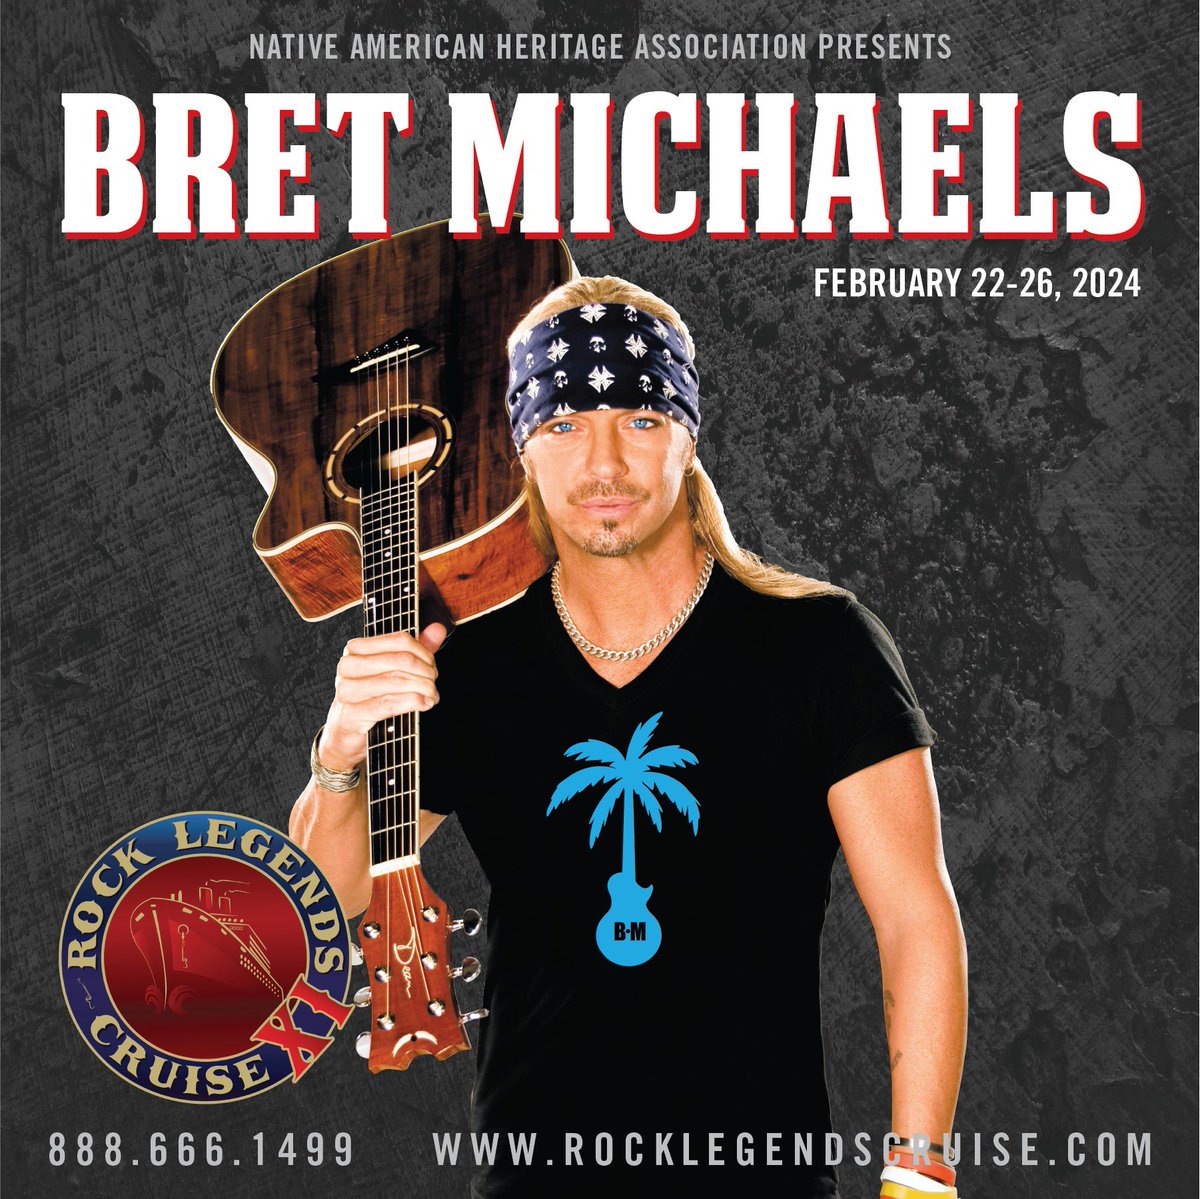 The Parti-Gras is hitting the high seas this coming February 2024 🚢 Join Bret Michaels @sammyhagar @rickspringfield and a boatload of awesome music on the @RockLegendsCruz! 
For all the details & to book your spot before it's gone, click here:
rocklegendscruise.com/rlc11/